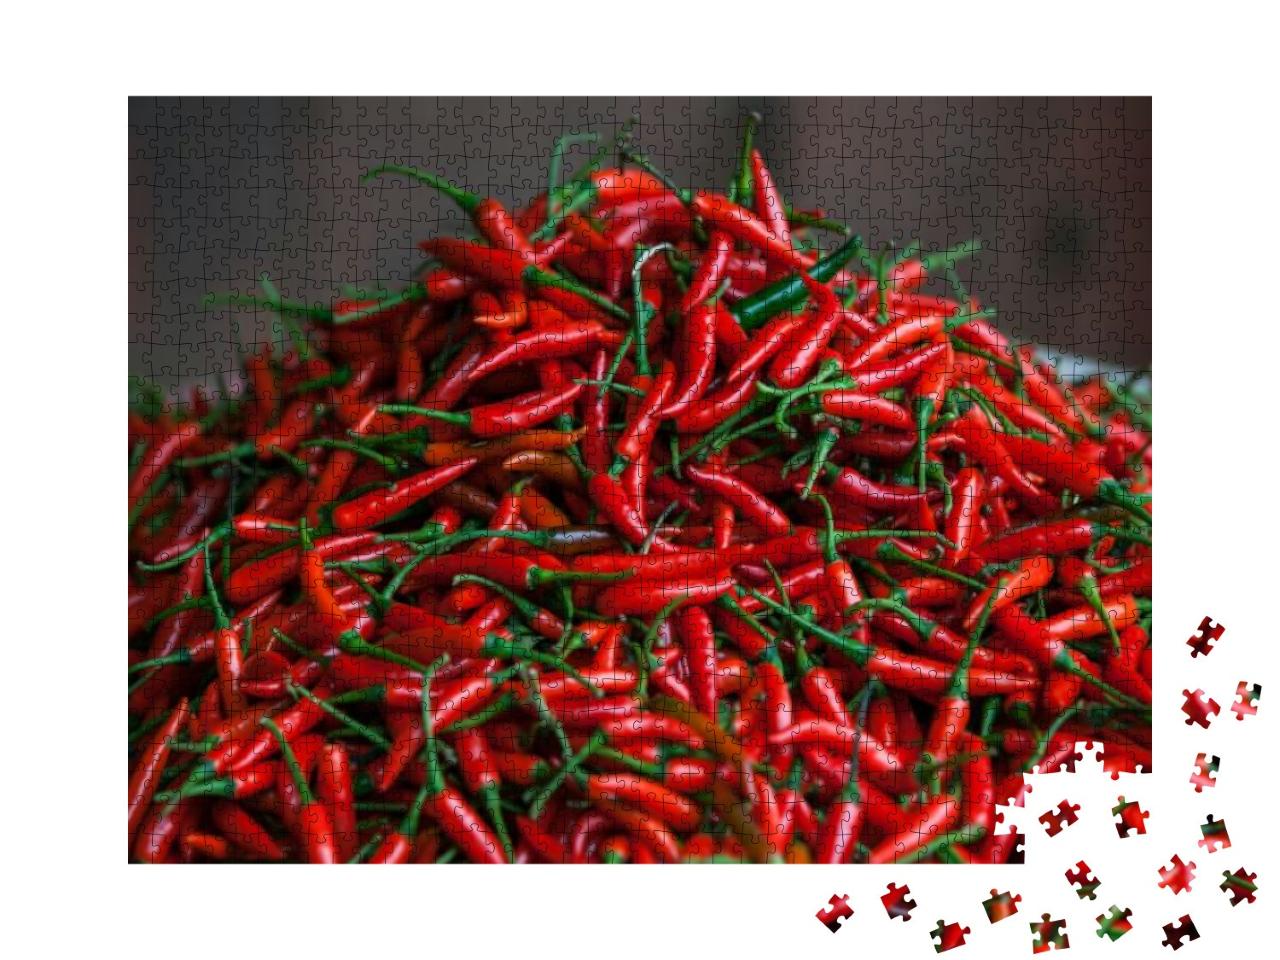 Red Chili Pepper At a Street Market, Vietnam... Jigsaw Puzzle with 1000 pieces